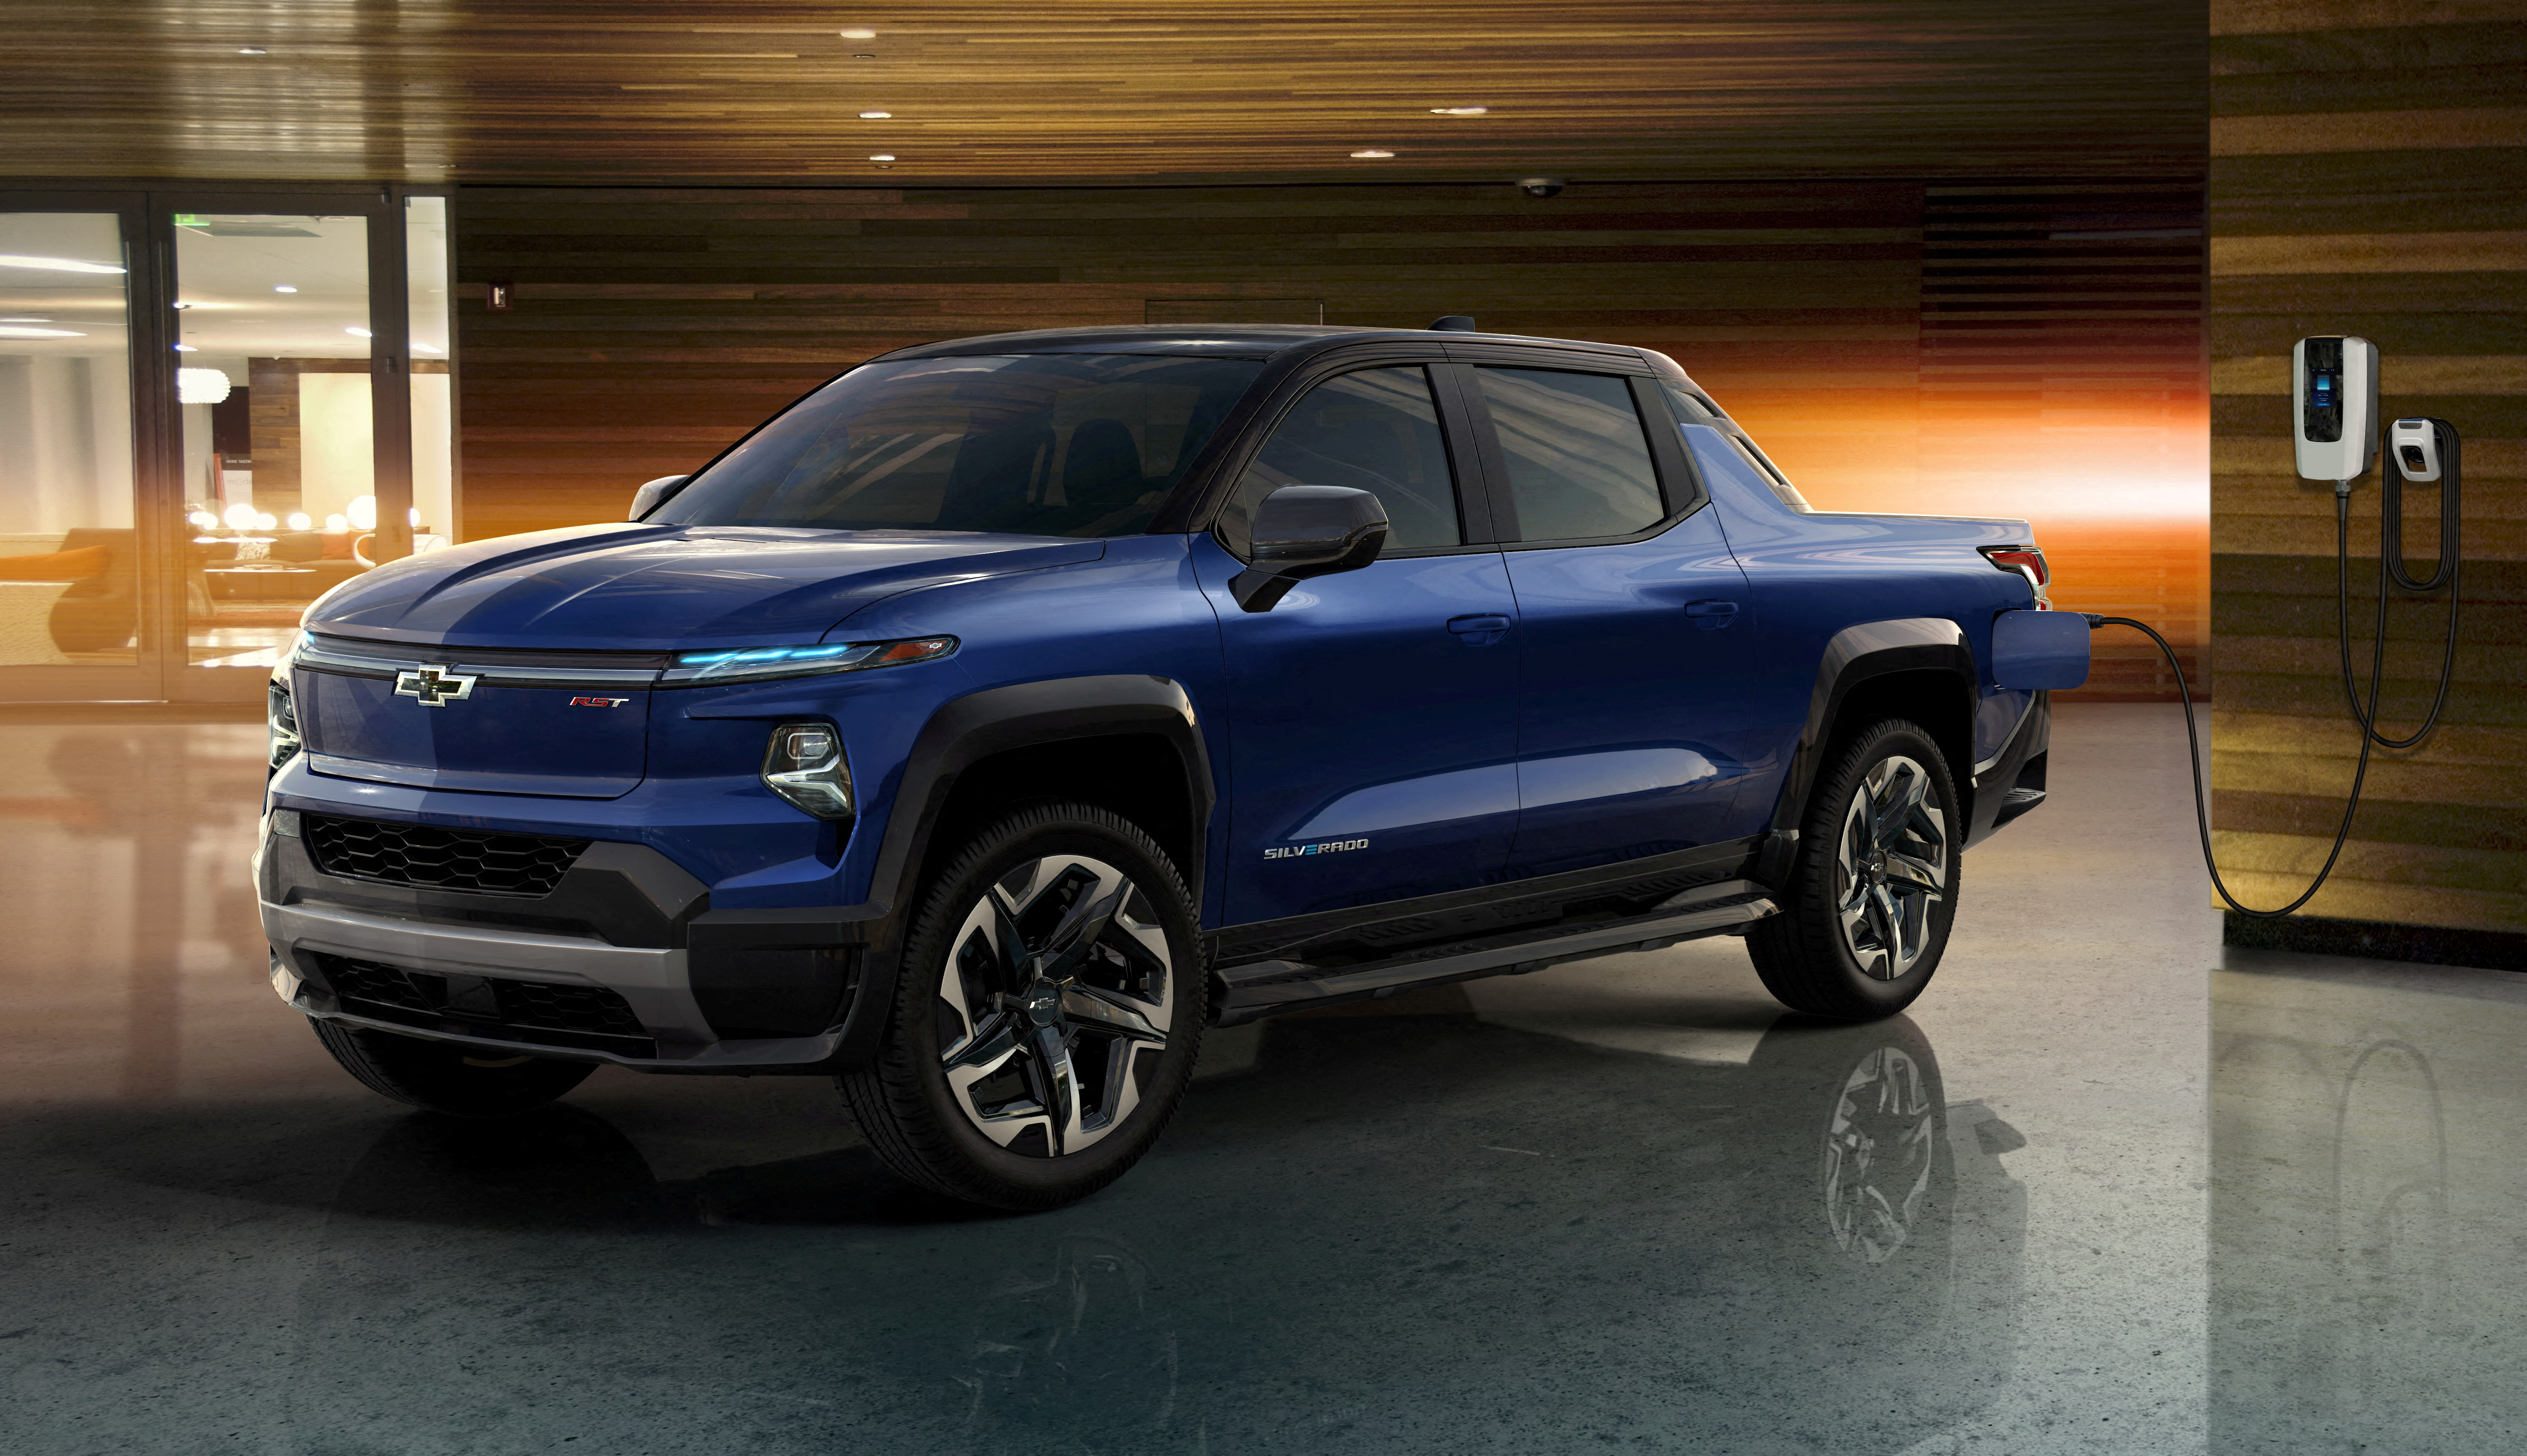 General Motors' electric Chevrolet Silverado pickup truck planned to launch in 2023